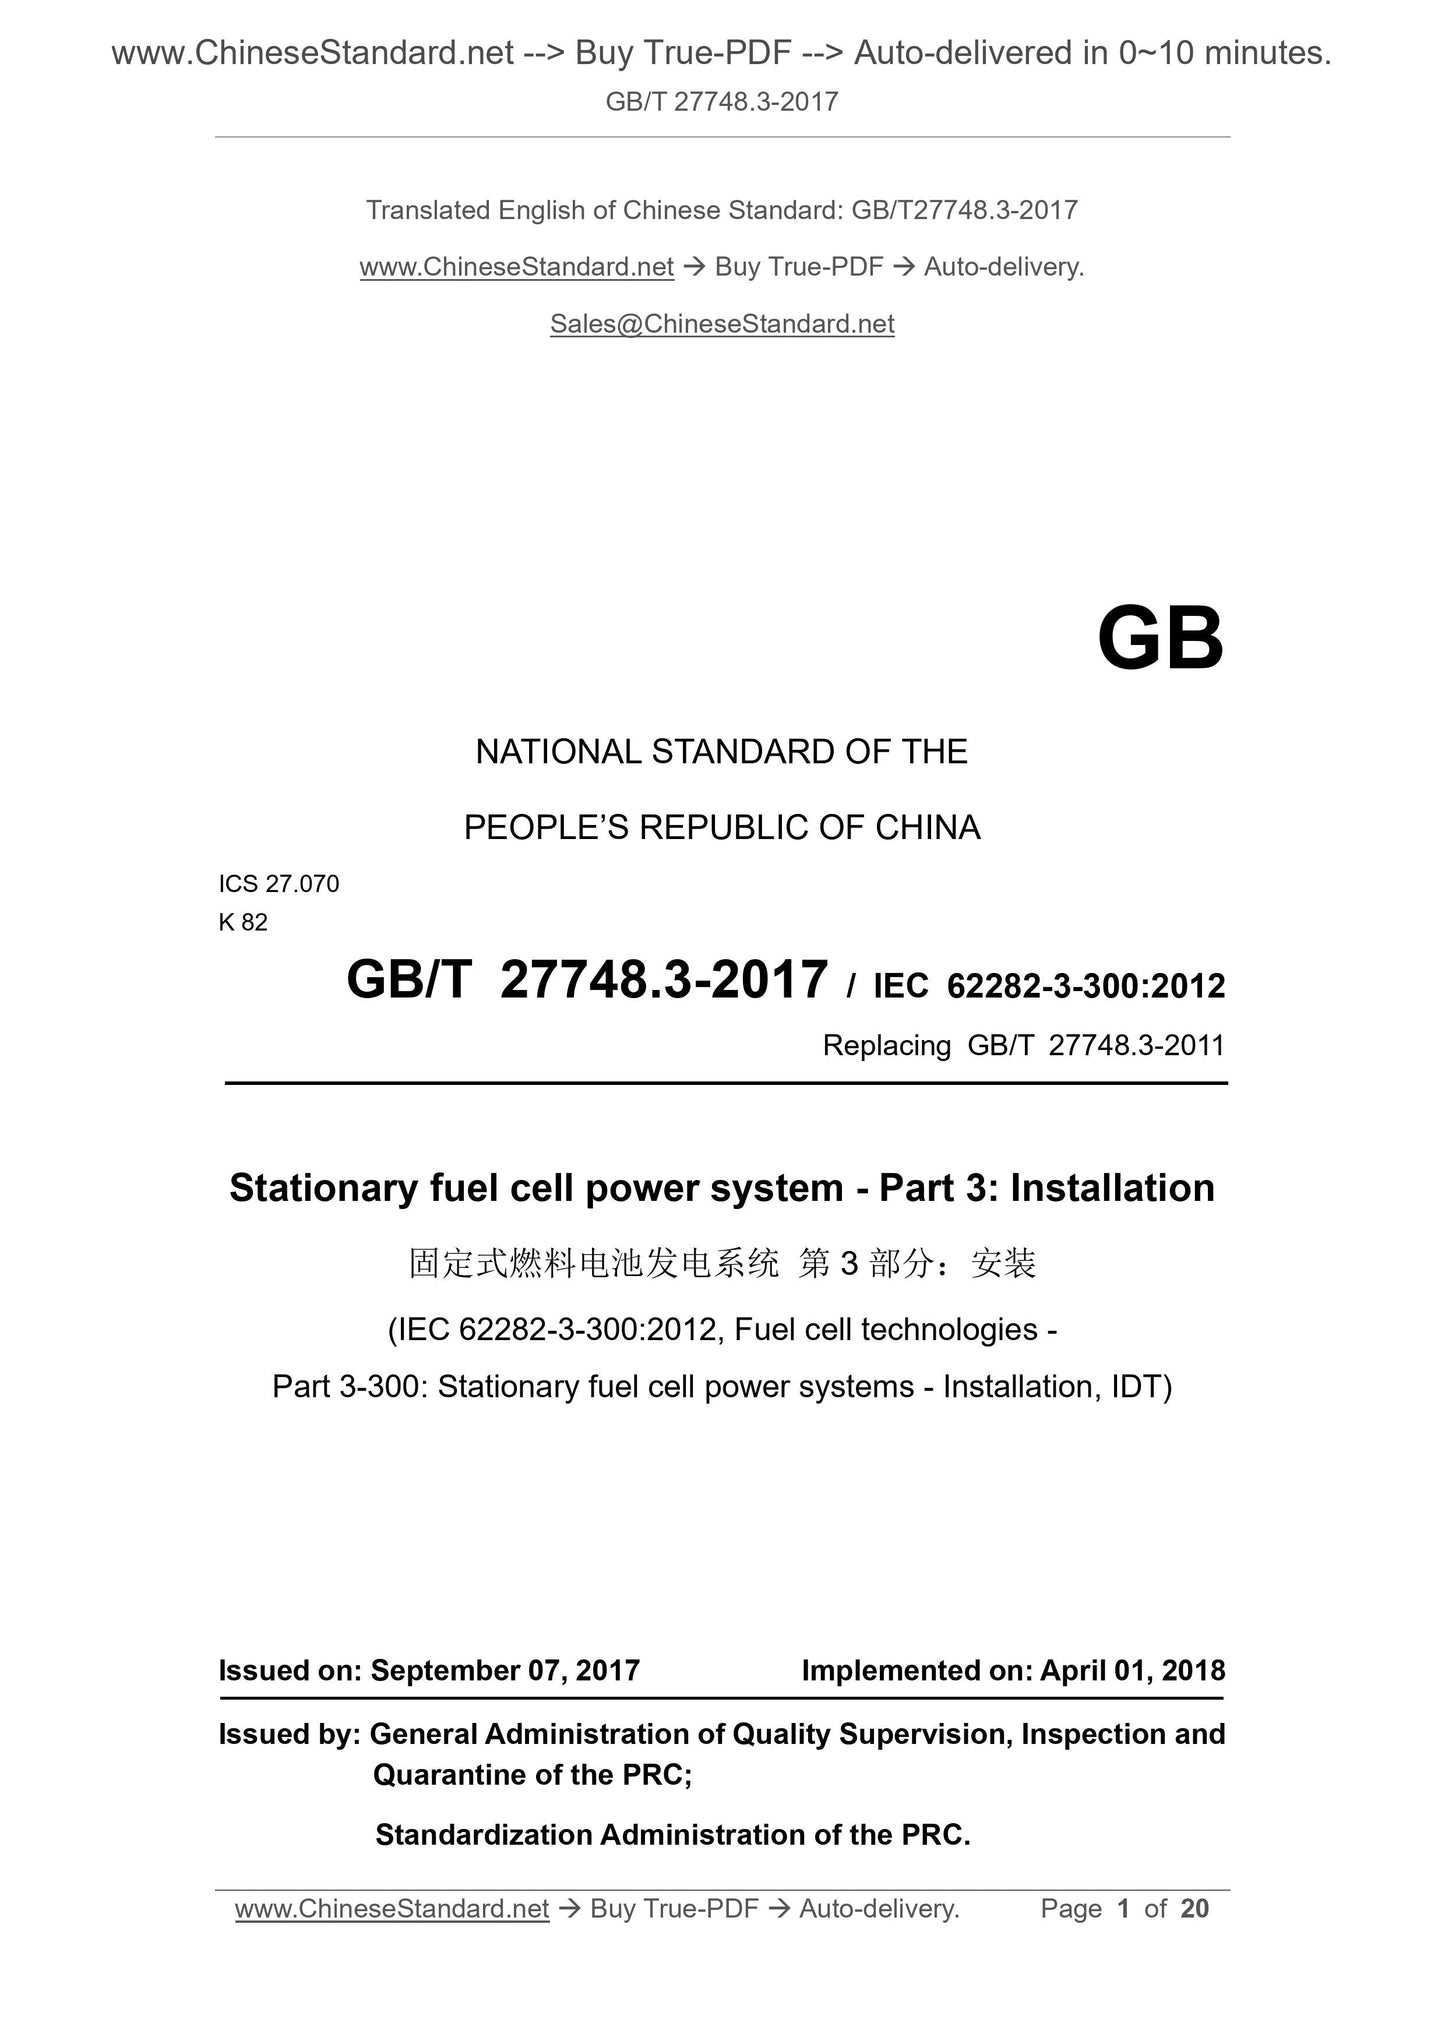 GB/T 27748.3-2017 Page 1